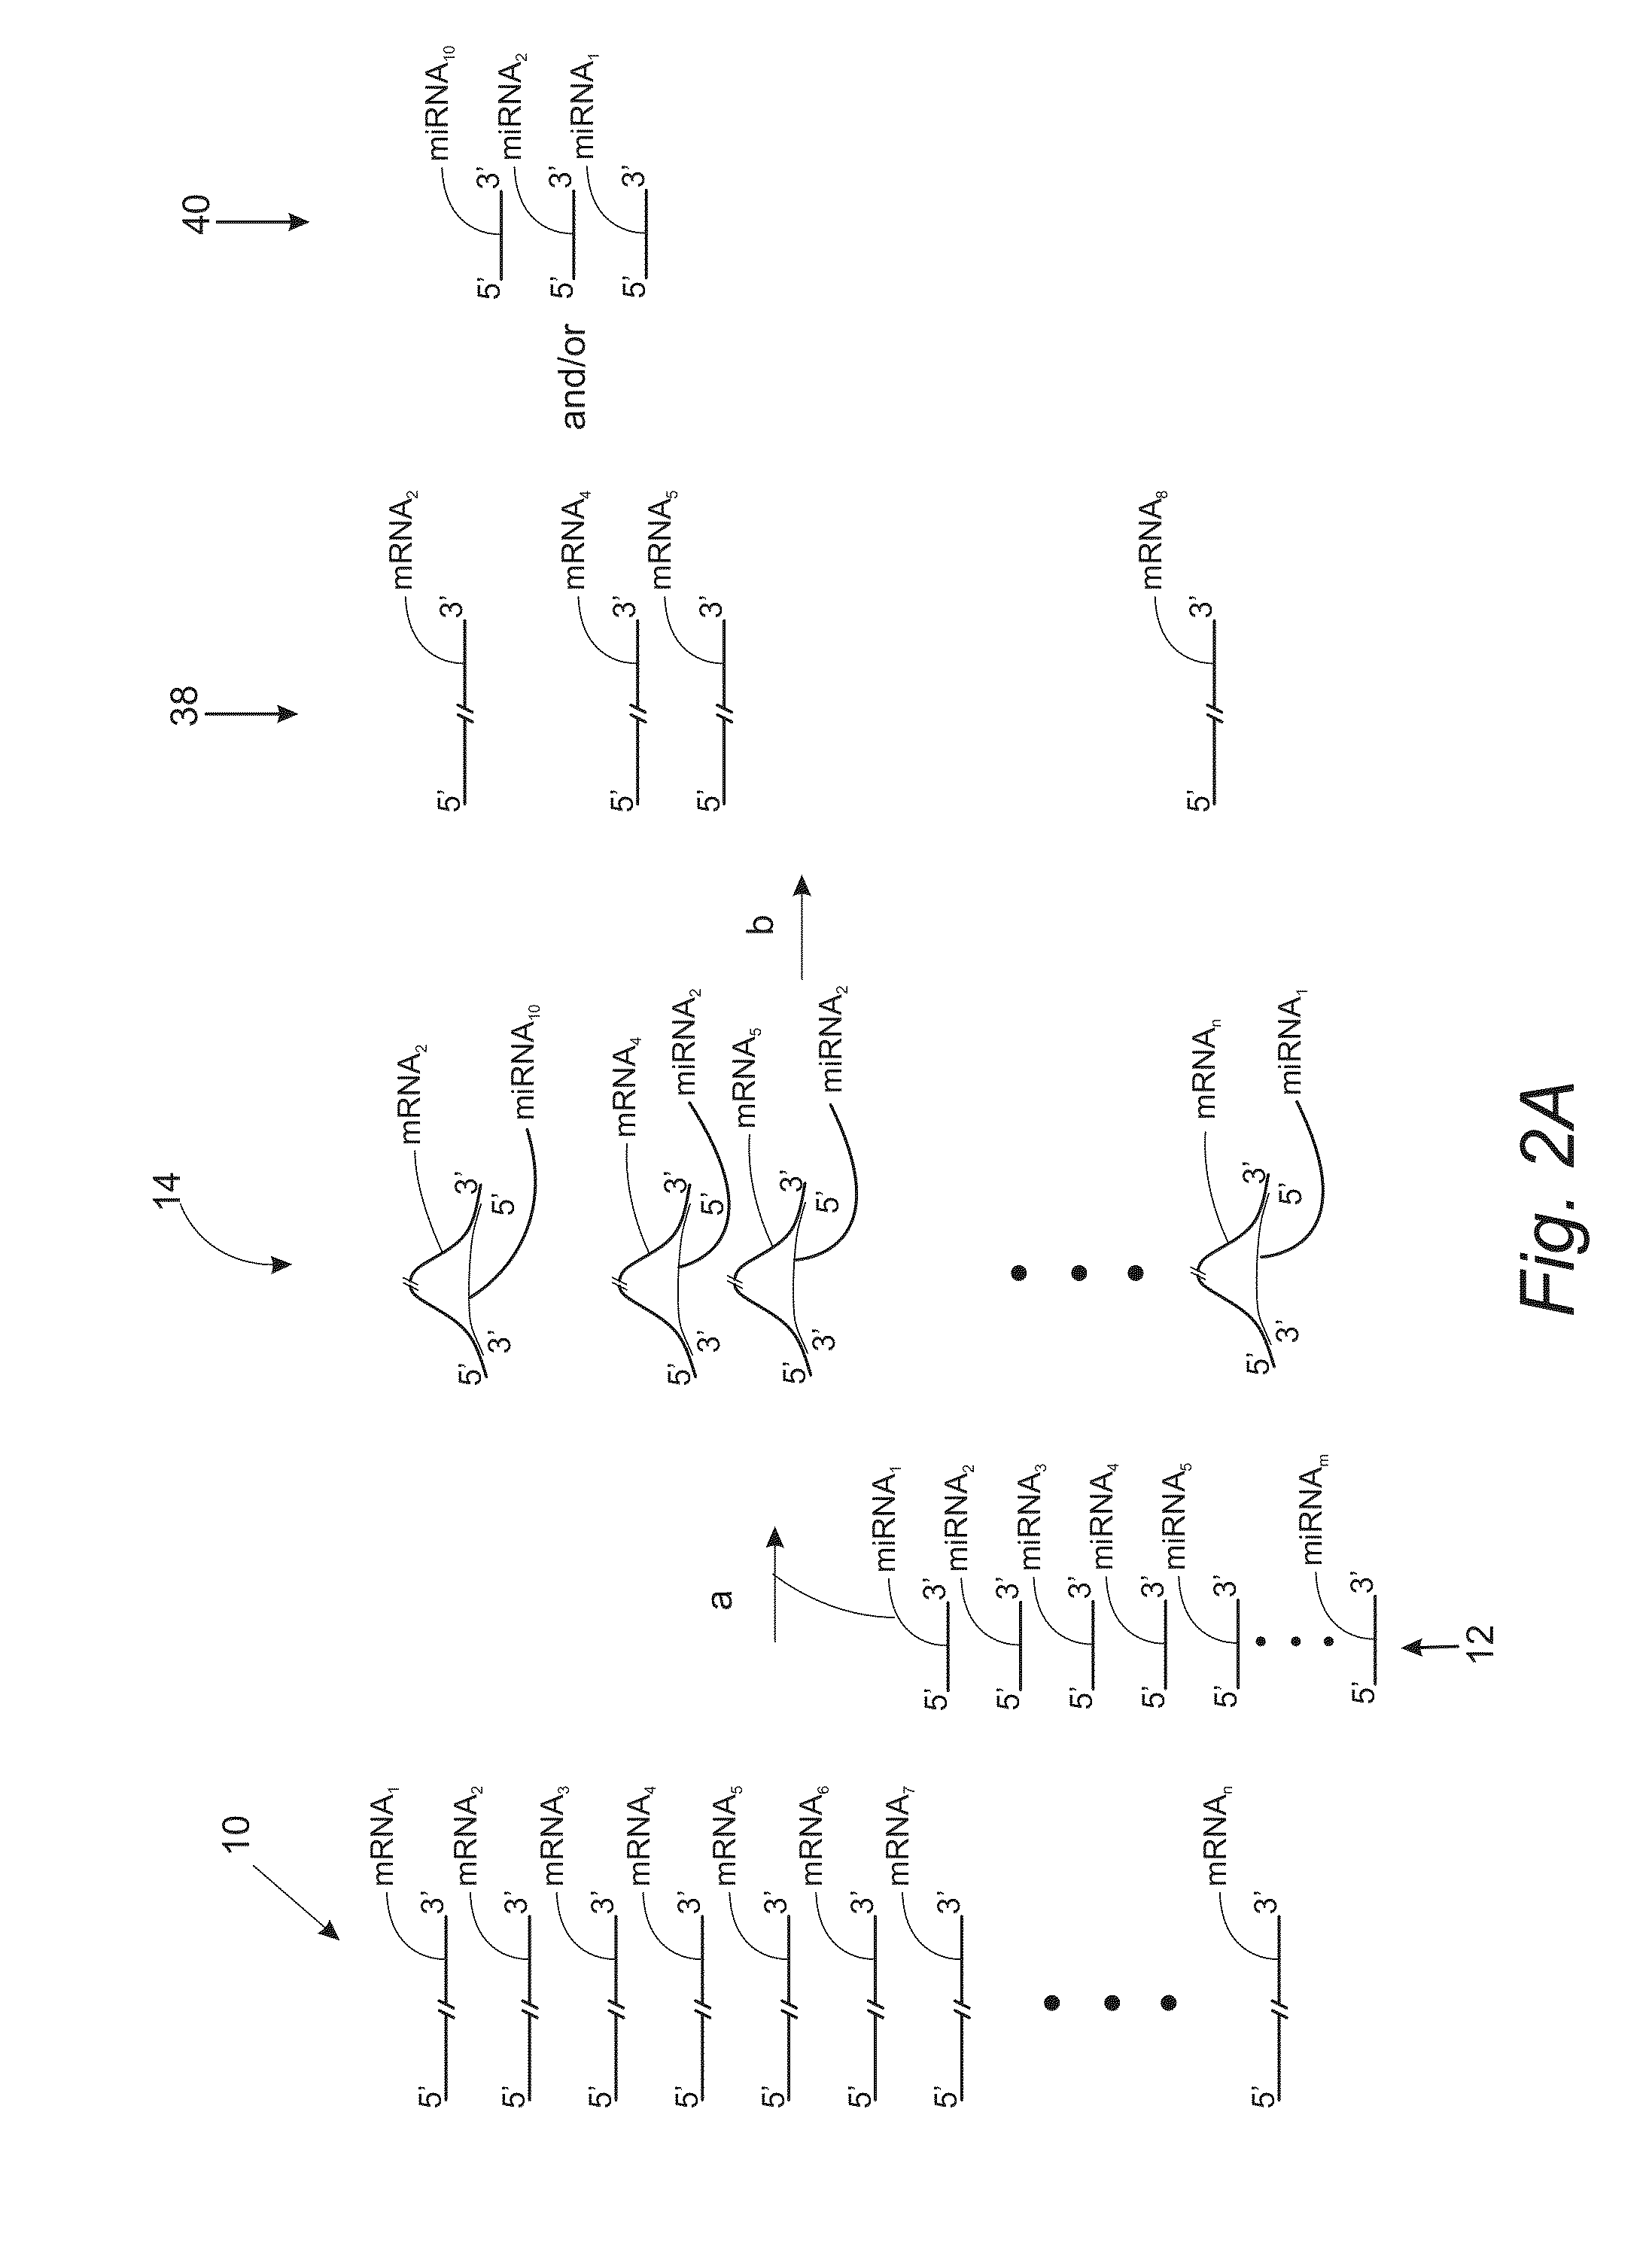 Method of Determining a Diseased State in a Subject